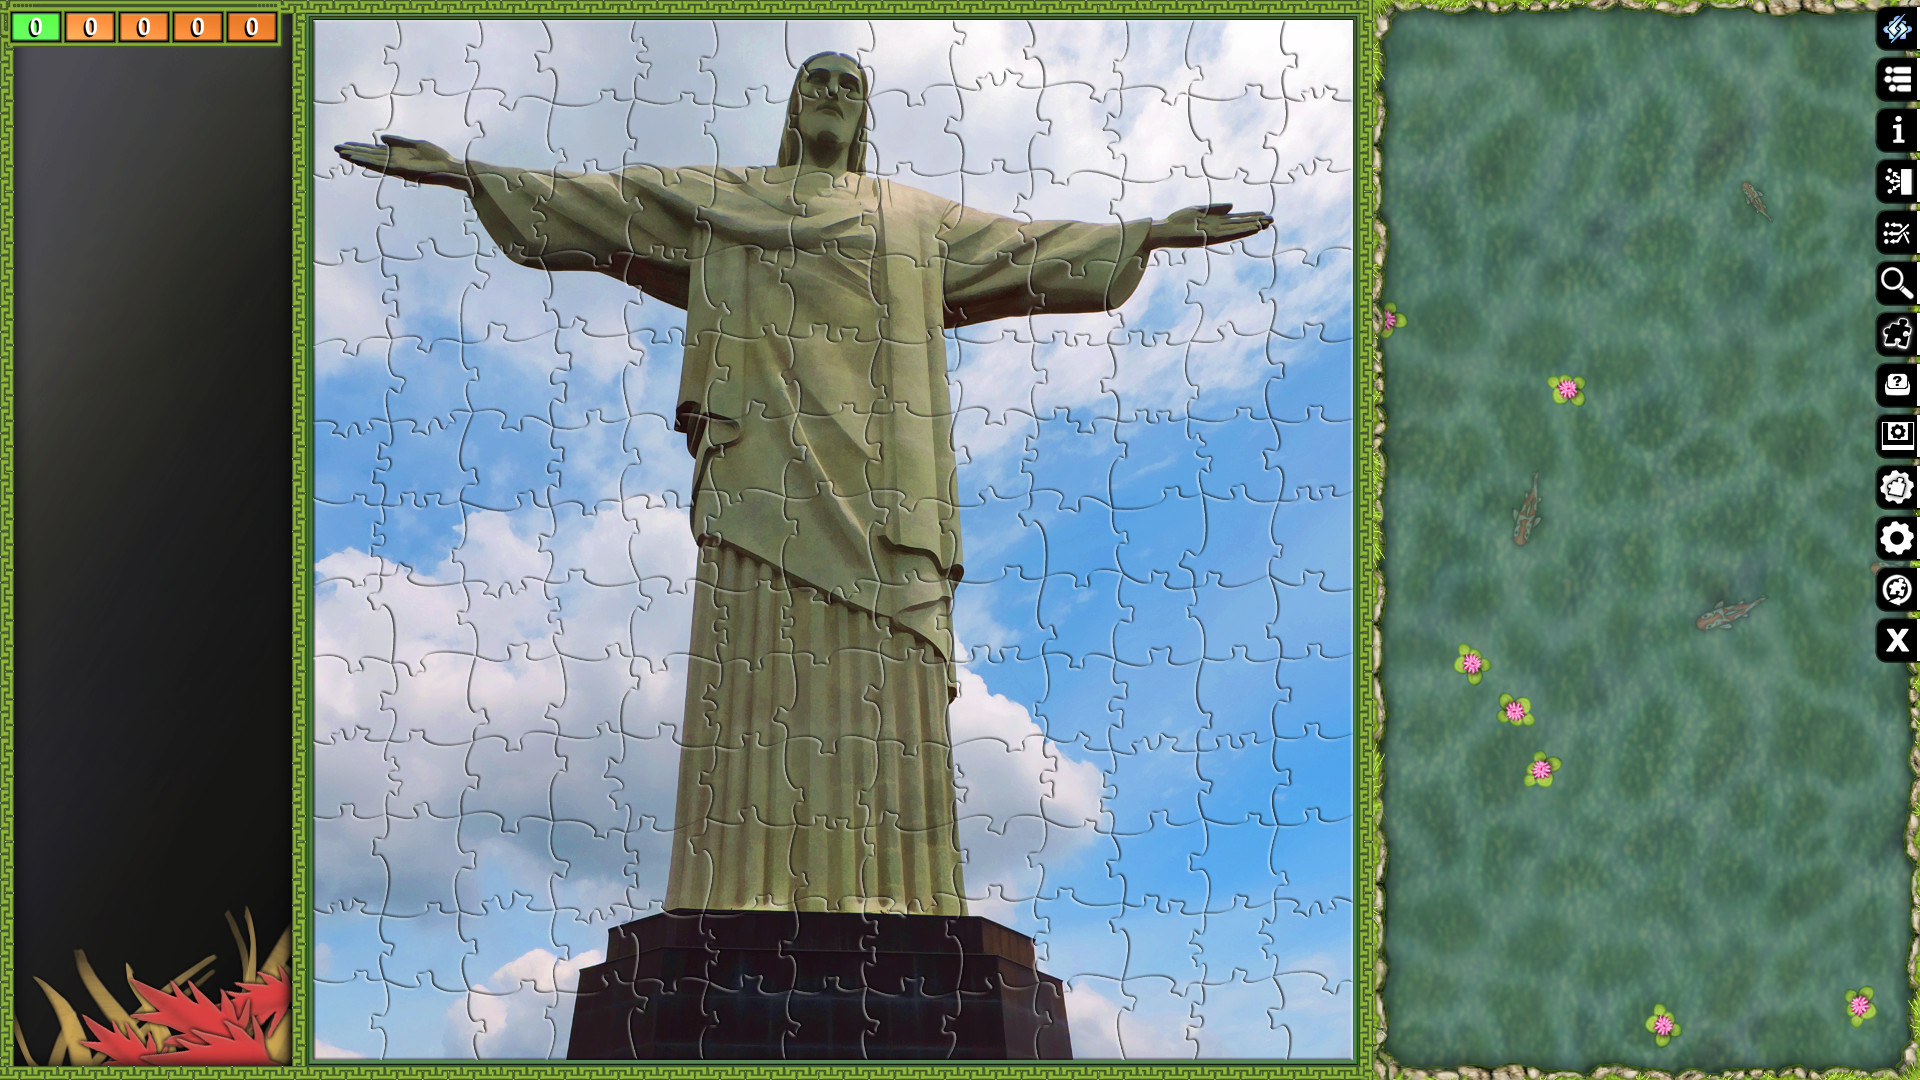 Jigsaw Puzzle Pack - Pixel Puzzles Ultimate: Rio screenshot